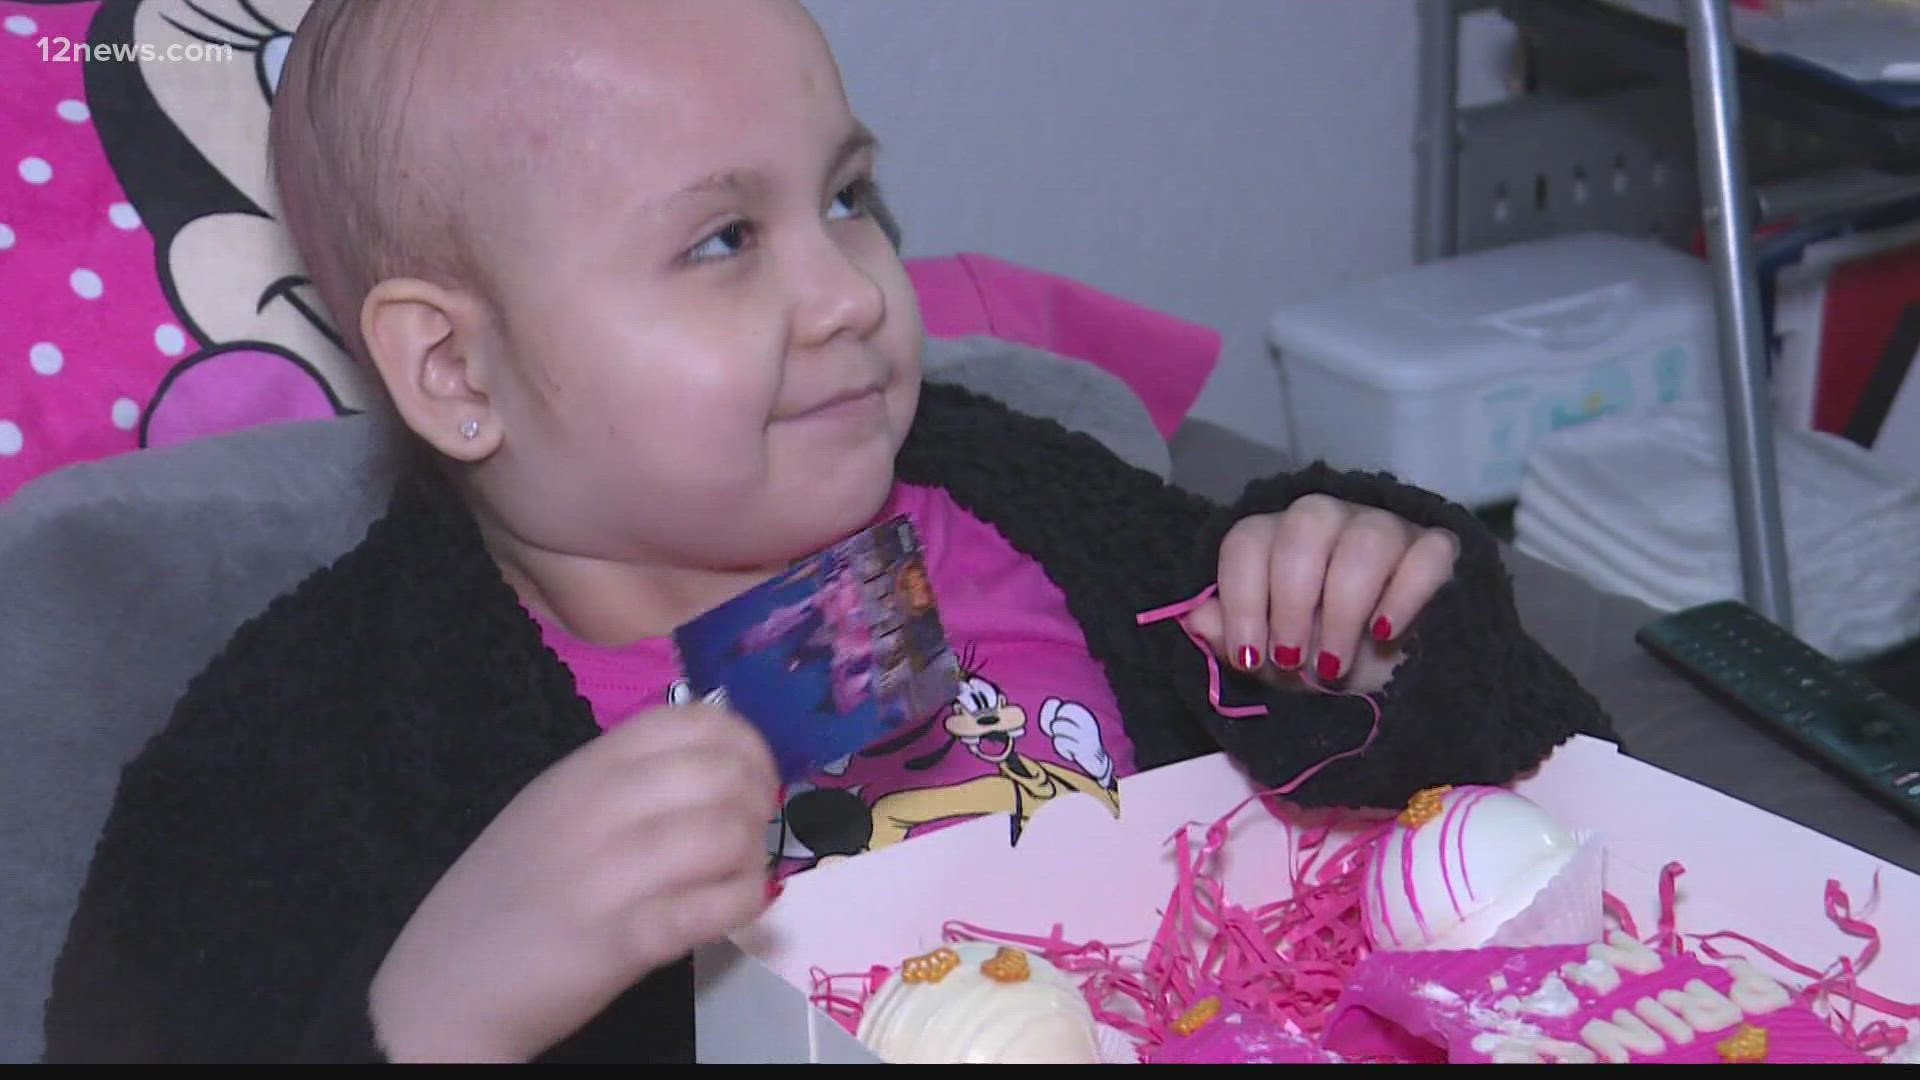 Back in October, the family of 8-year-old Mali Maltos reached out to 12 News to help make her wish happen after it was canceled.